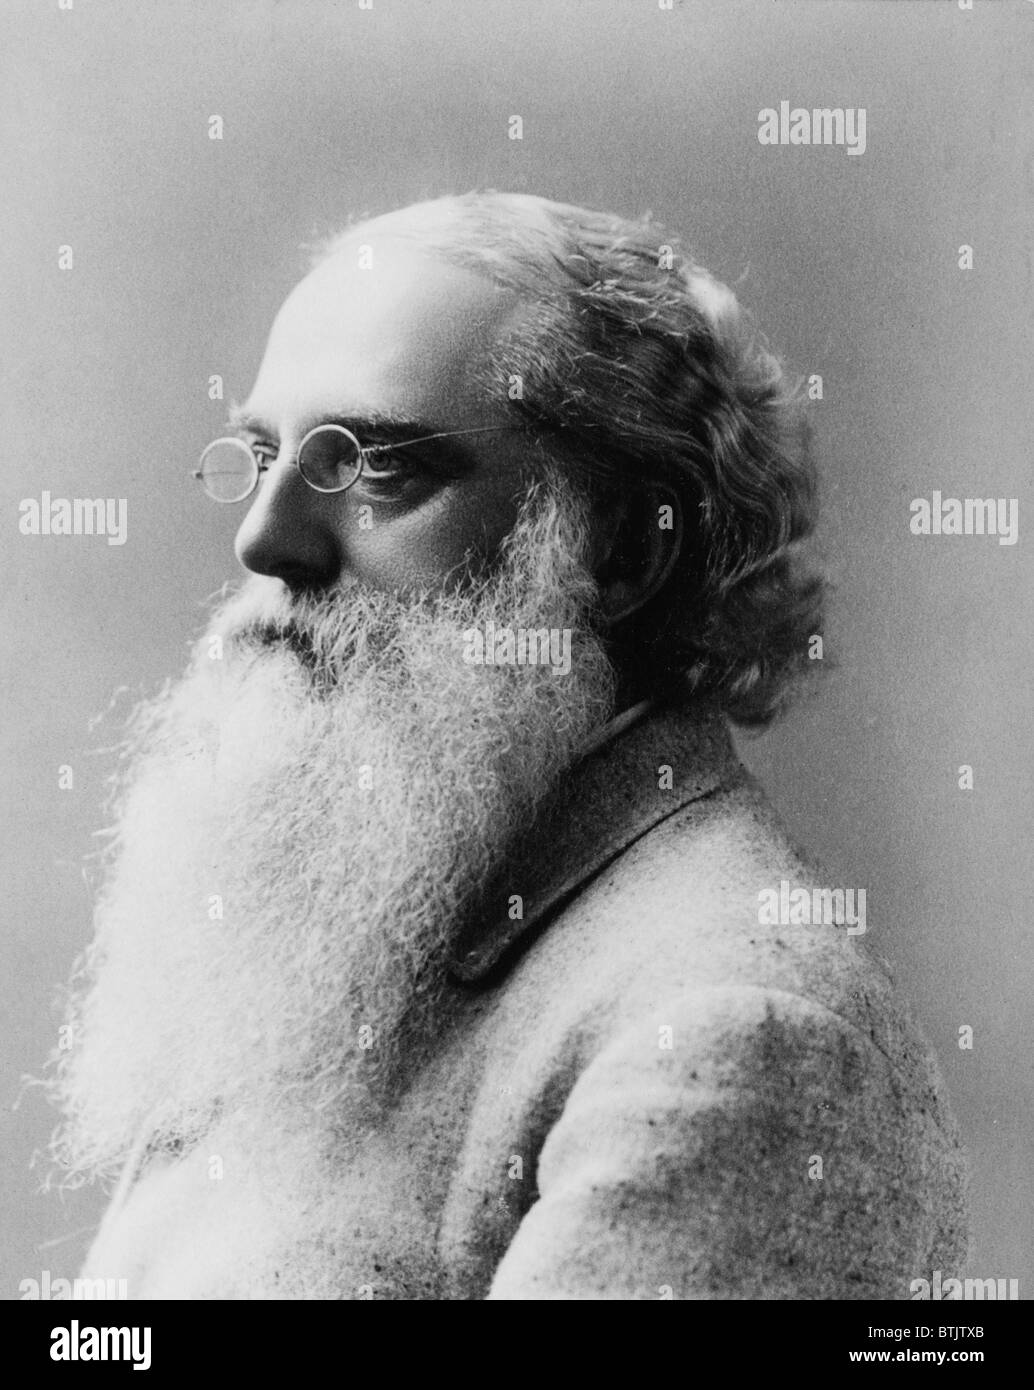 Henry Steel Olcott (1832-1907), American philosopher, and who, with Helena Blavatsky and William Judge, founded the Theosophical Society in 1875, which combines beliefs of Buddhism, Hinduism, and Christianity. Stock Photo